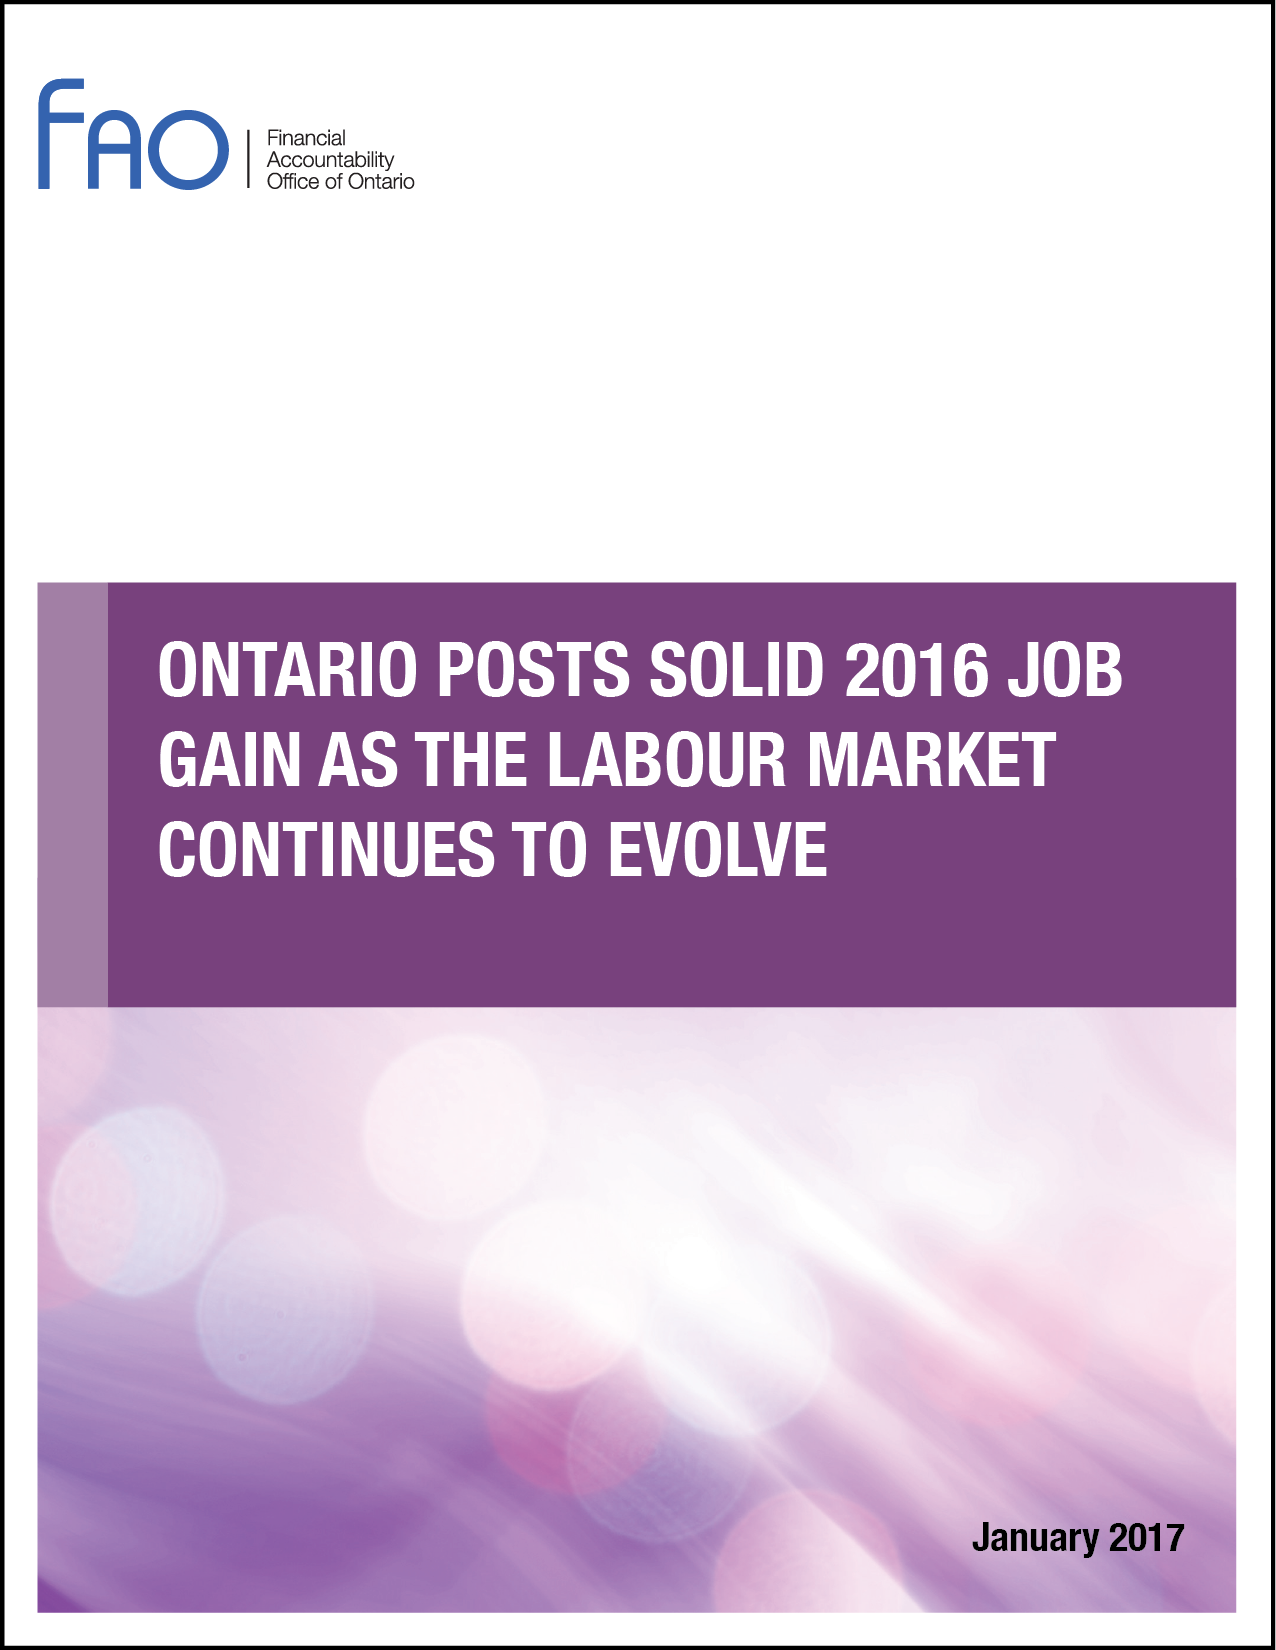 Ontario Posts Solid 2016 Job Gain as the Labour Market Continues to Evolve